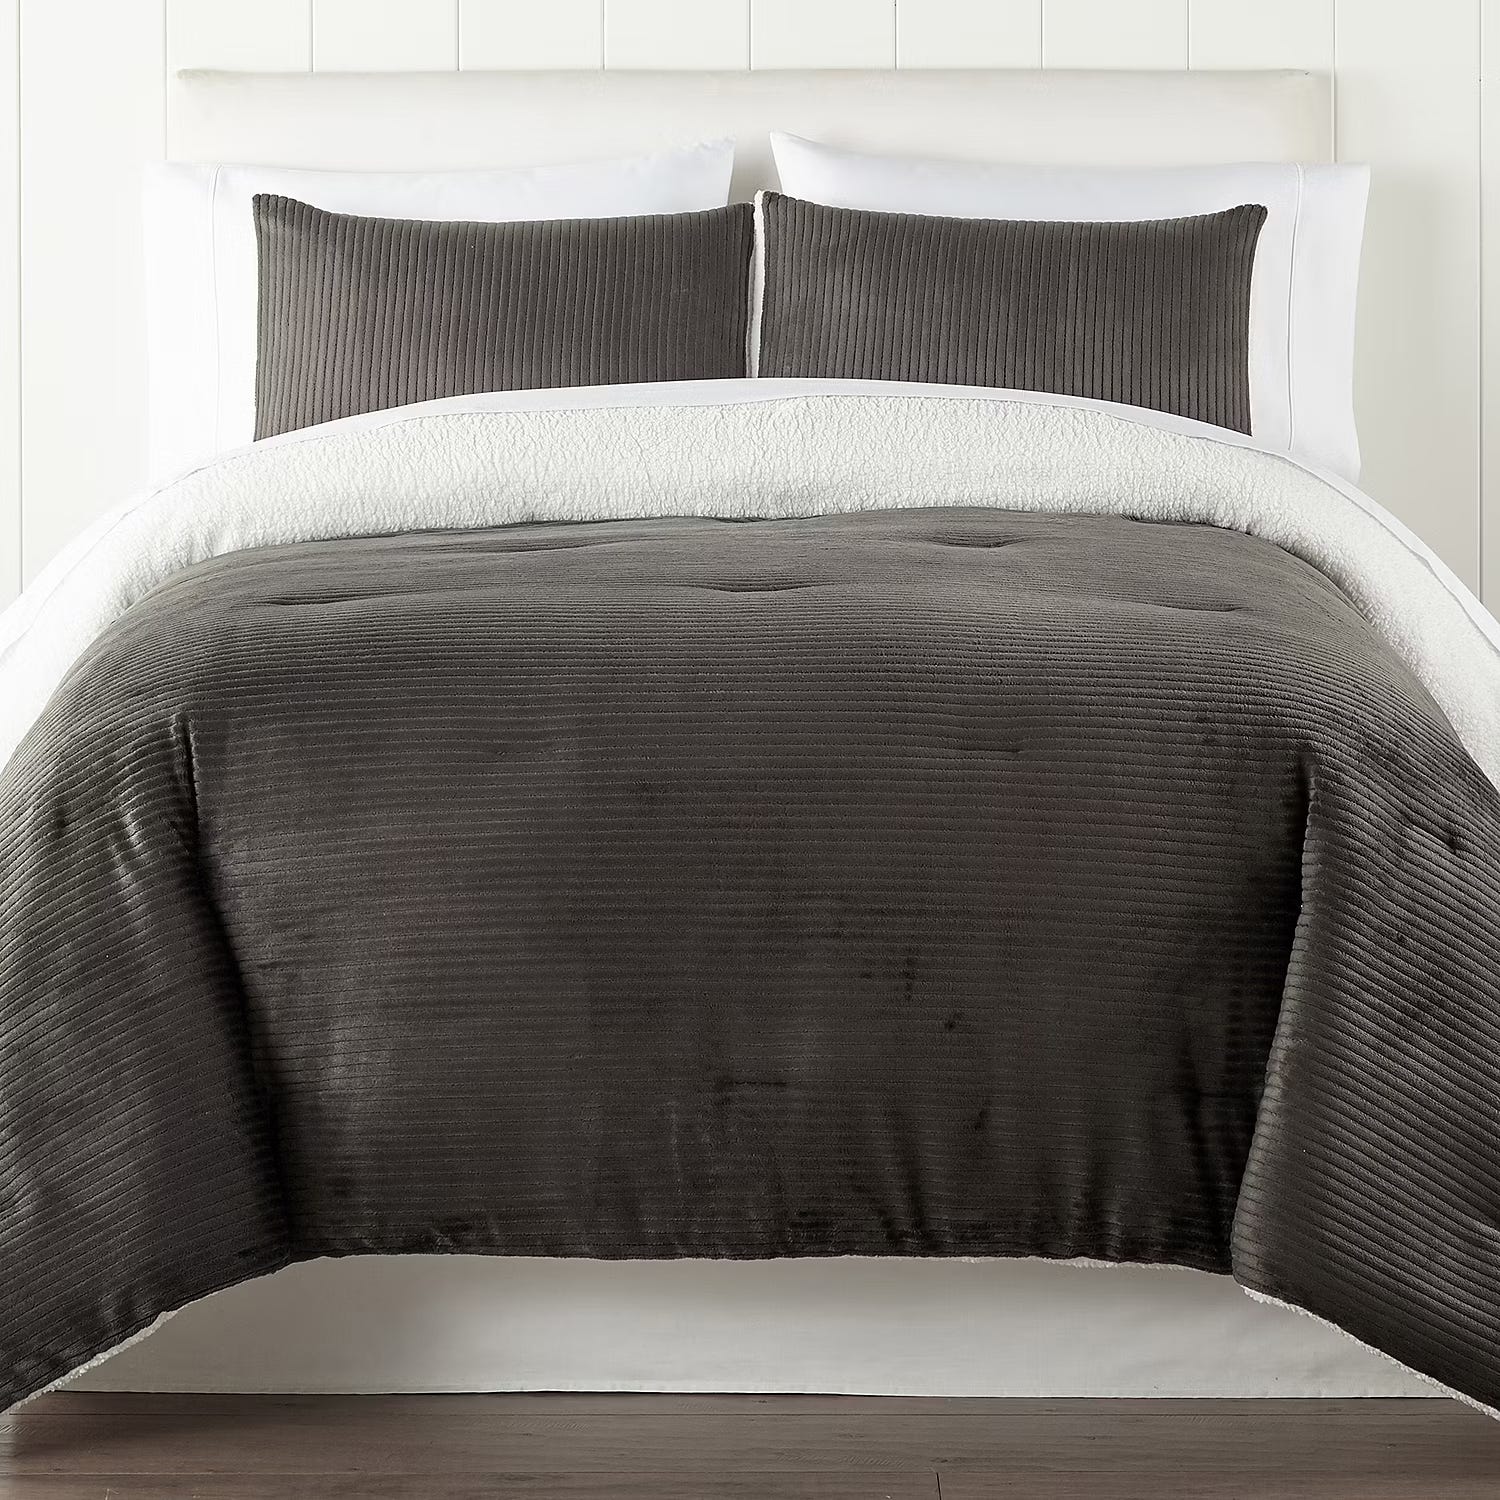 A bed with white sheets topped with a textured dark gray coverlet and matching pillows.